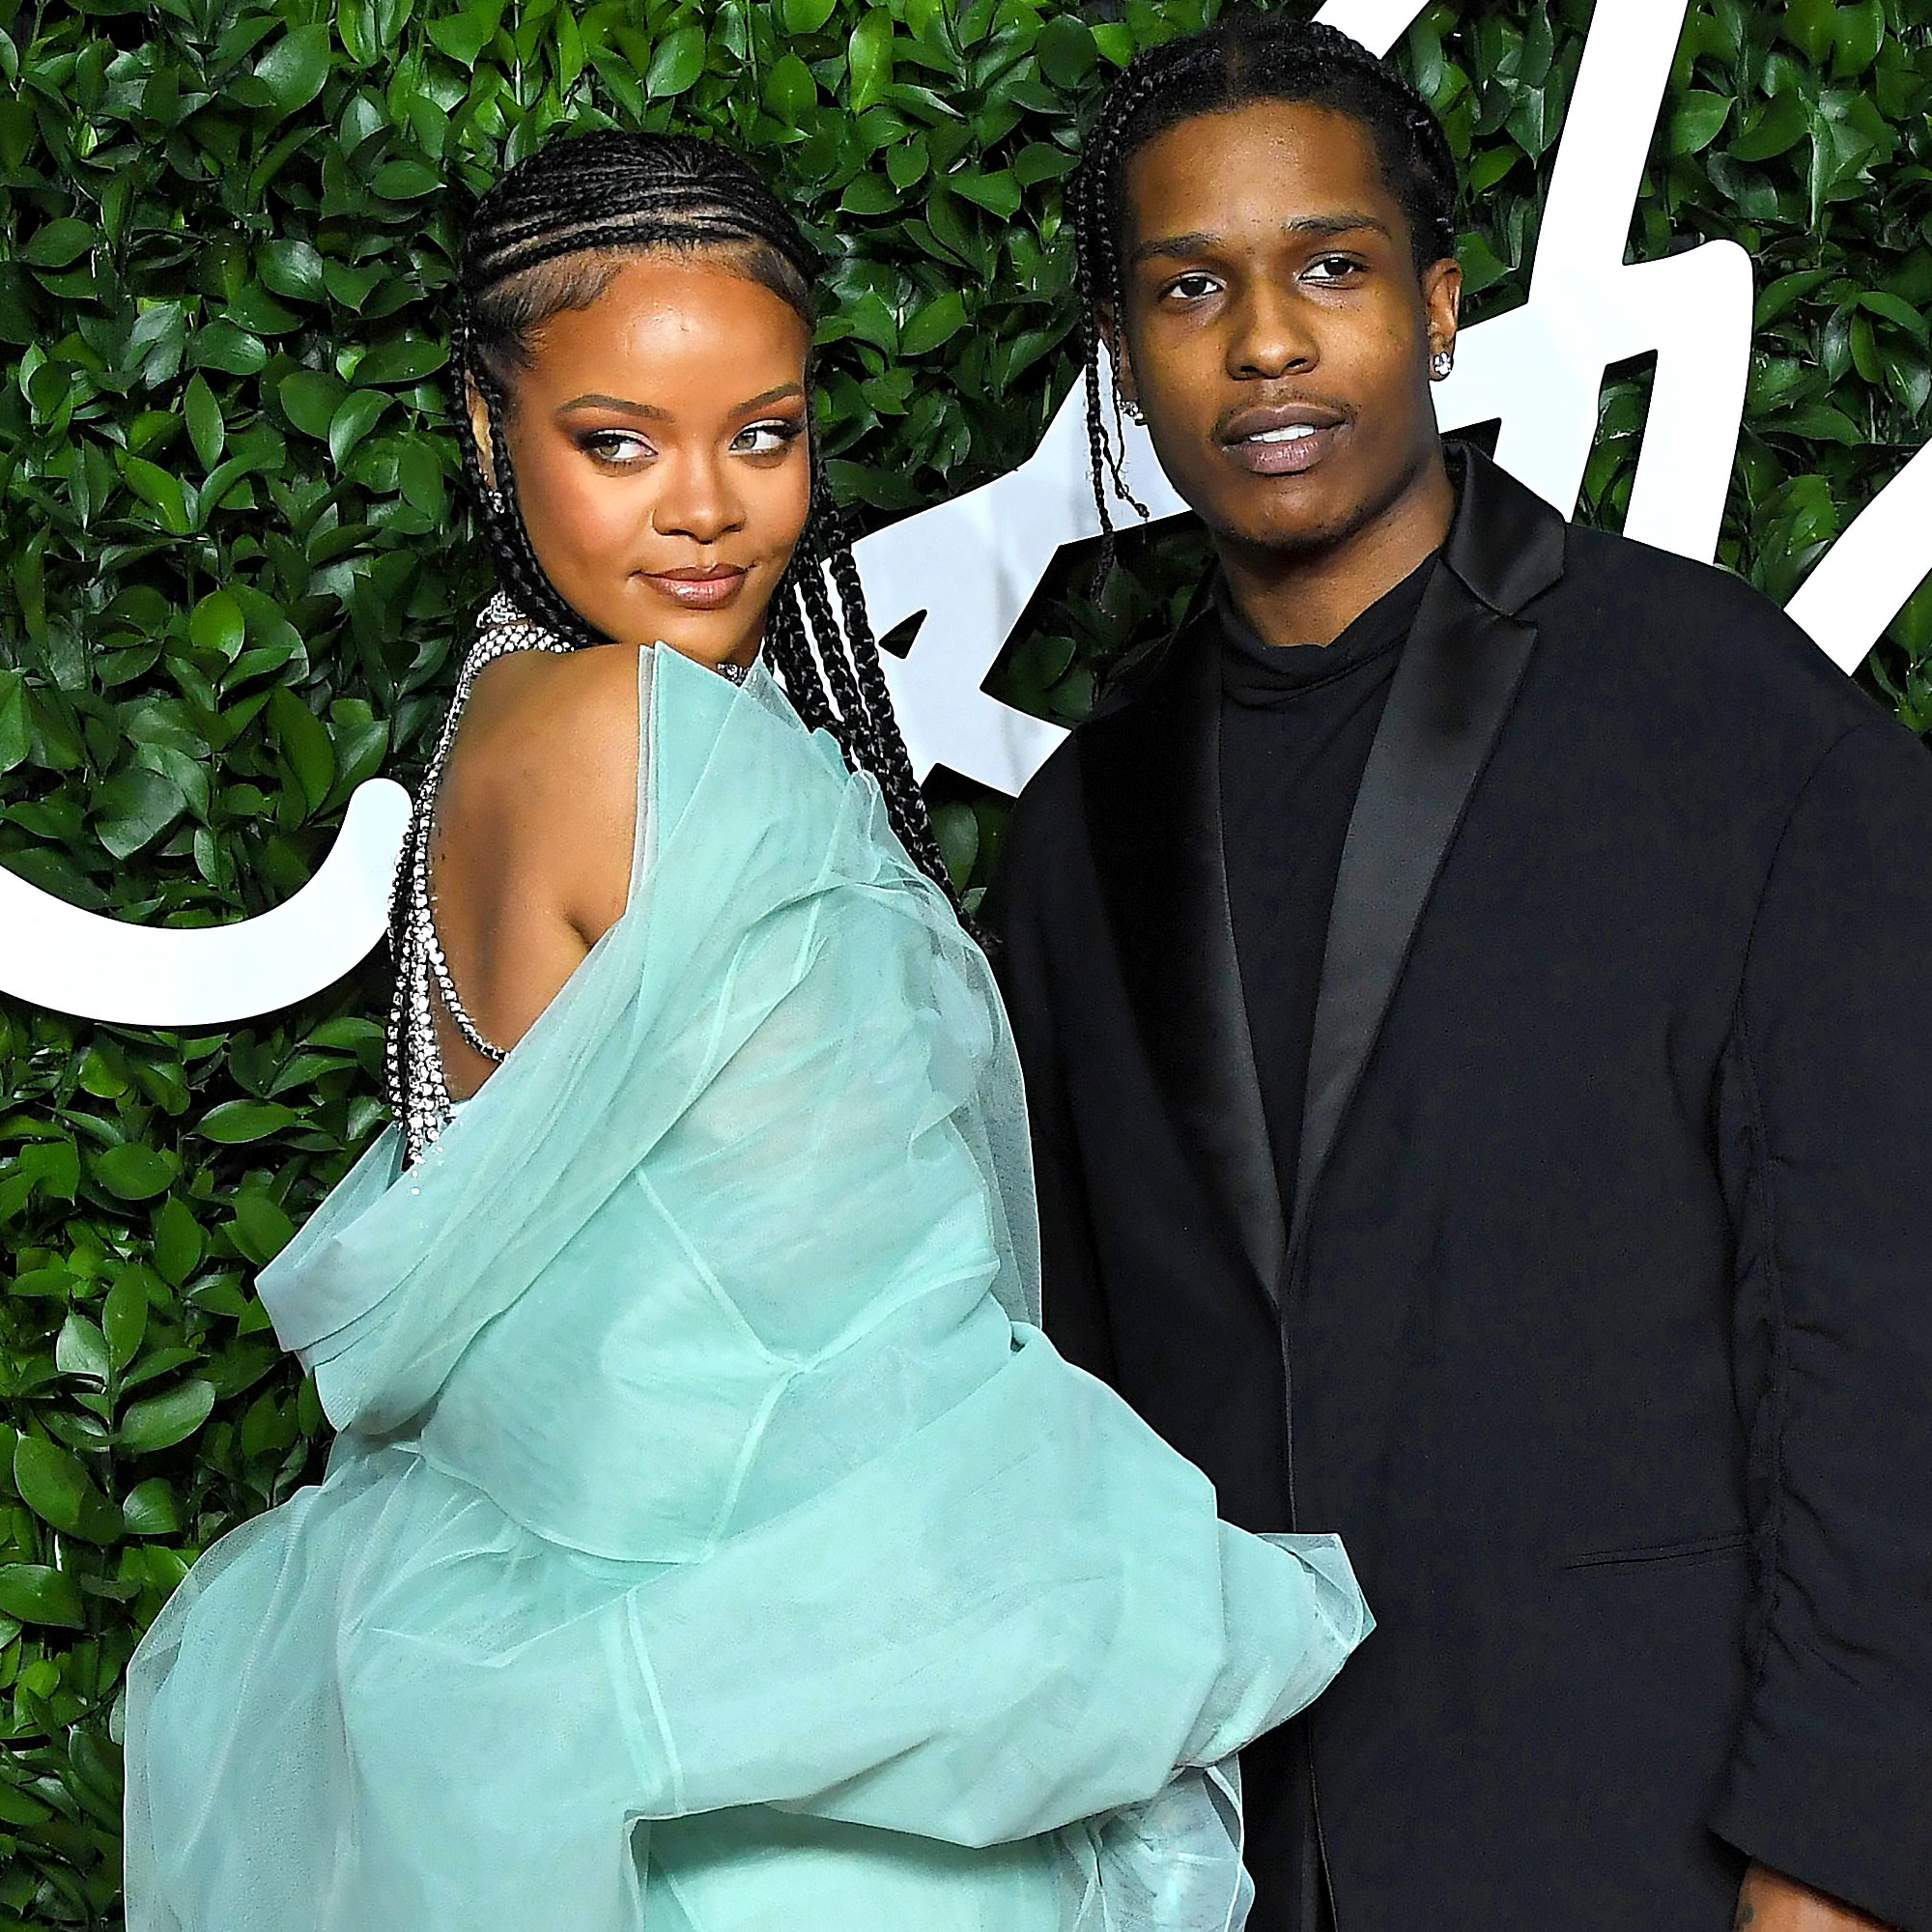 Rihanna, Asap Rocky May Get Engaged 'Soon,' Are 'Life Partners'